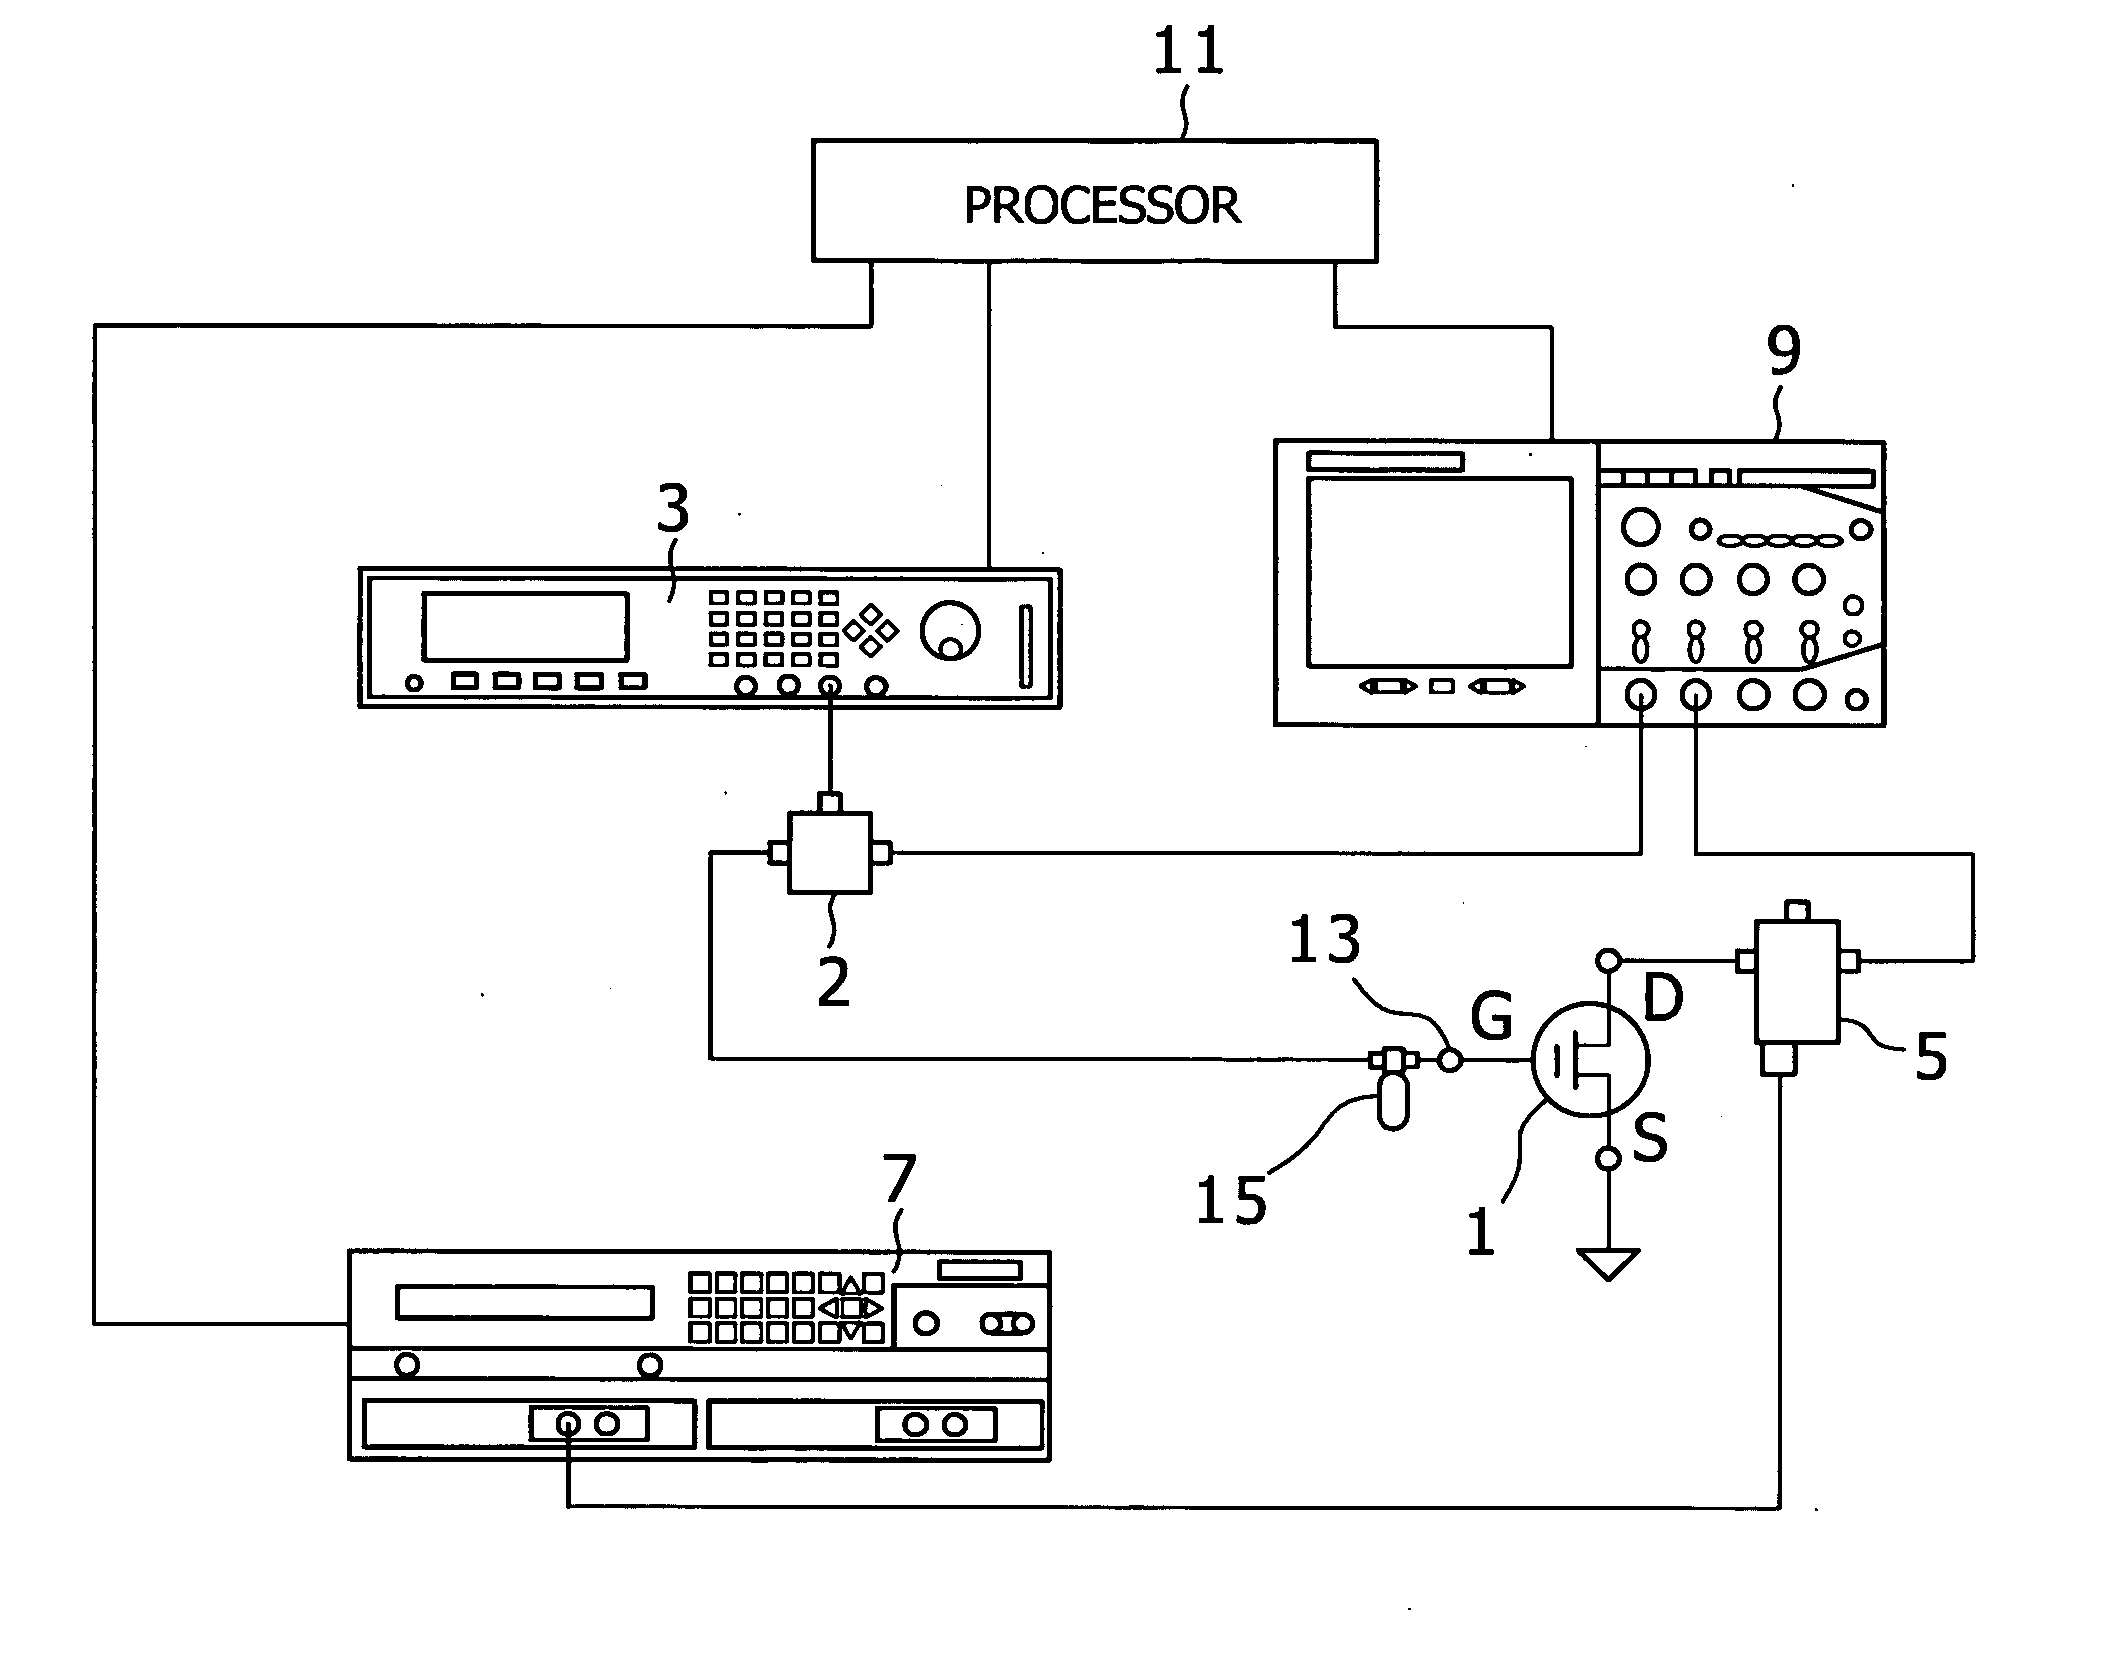 System for measuring FET characteristics